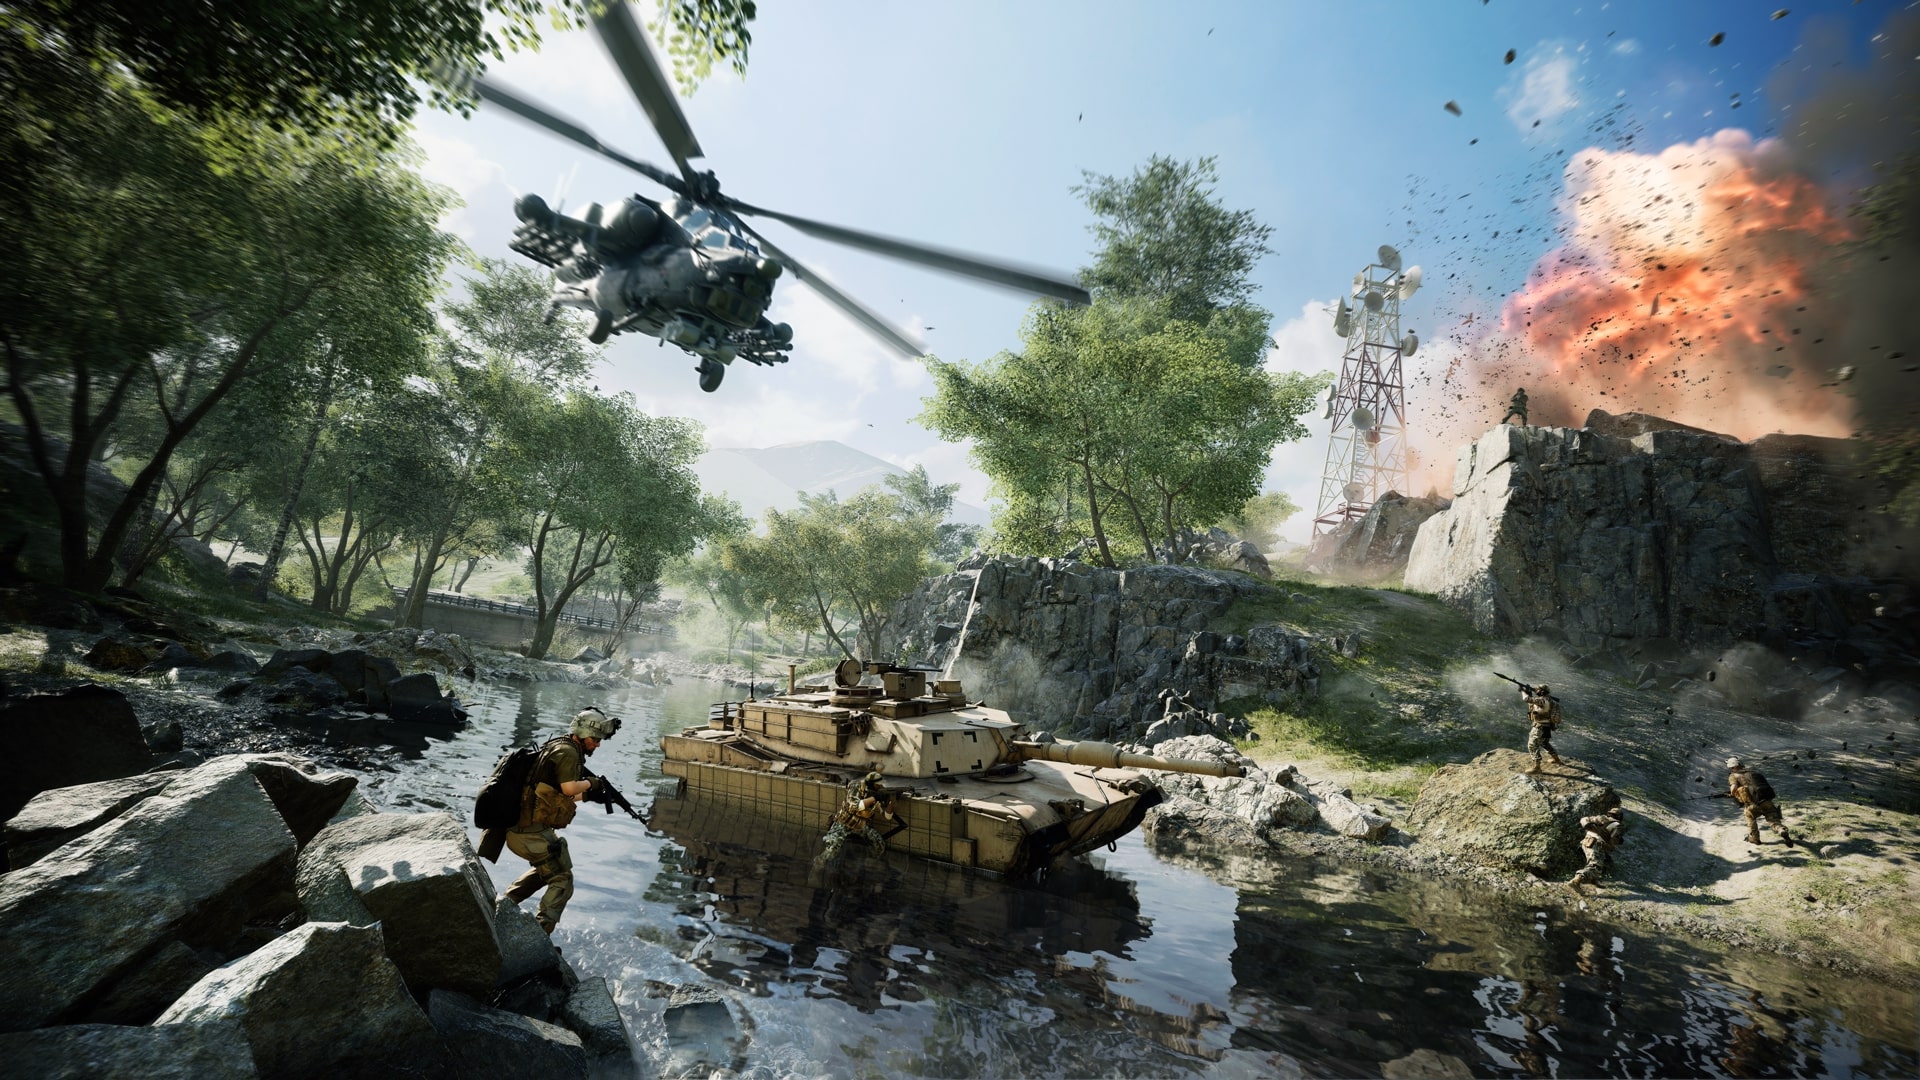 Battlefield 2042 will have crossplay and cross-progression, AI